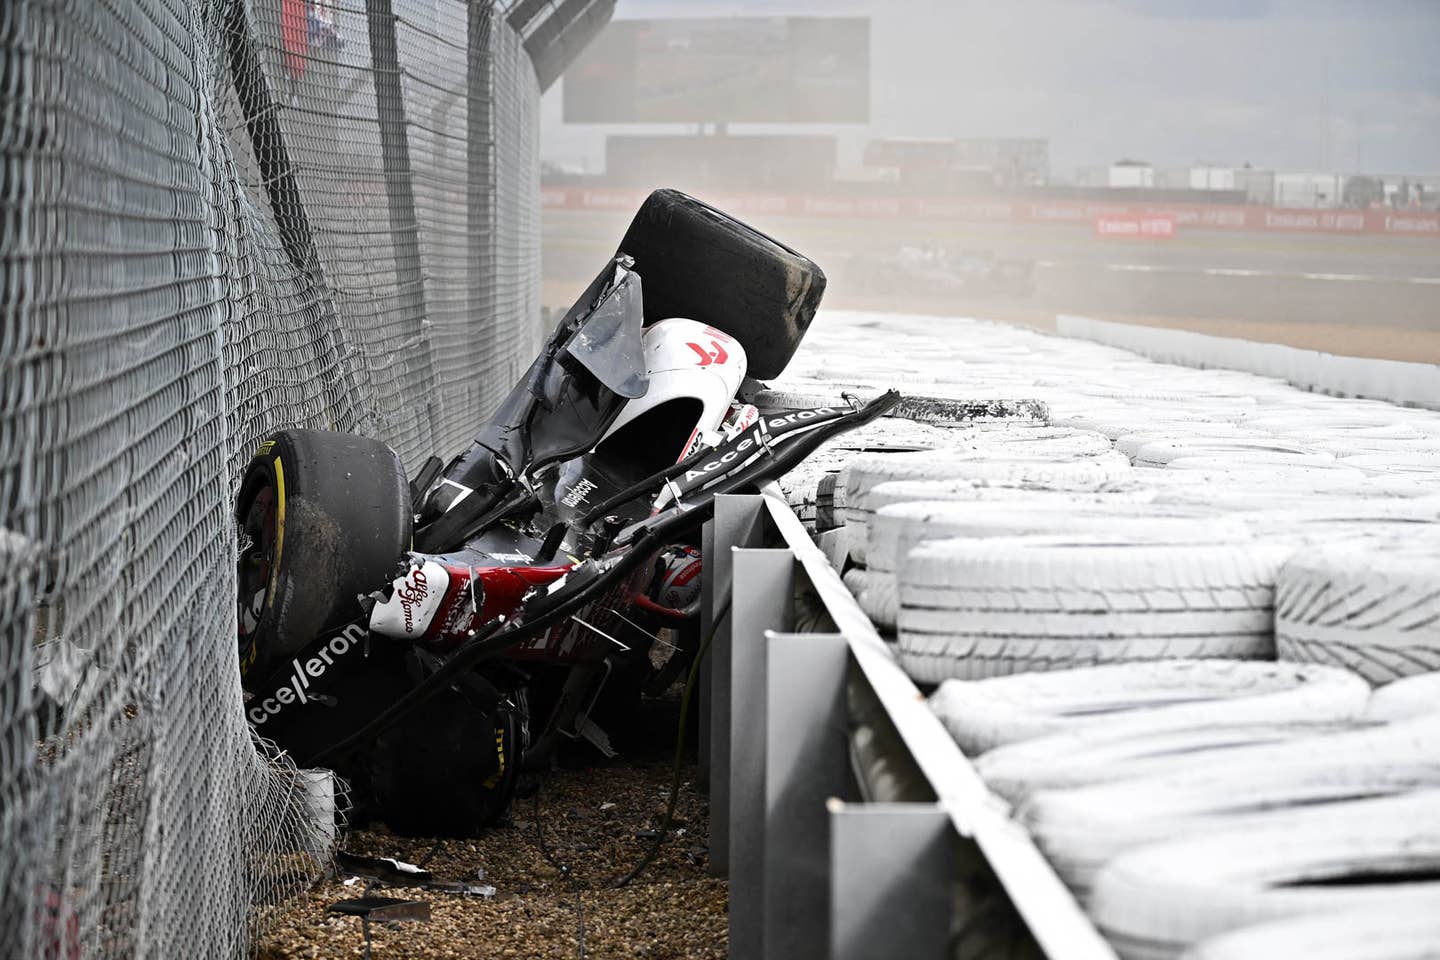 TOPSHOT - Alfa Romeo Chinese driver Zhou Guanyu is seen in the crash barriers during an incident at the star during the Formula One British Grand Prix at the Silverstone motor racing circuit in Silverstone, central England on July 3, 2022. (Photo by Ben Stansall / AFP) (Photo by BEN STANSALL/AFP via Getty Images)